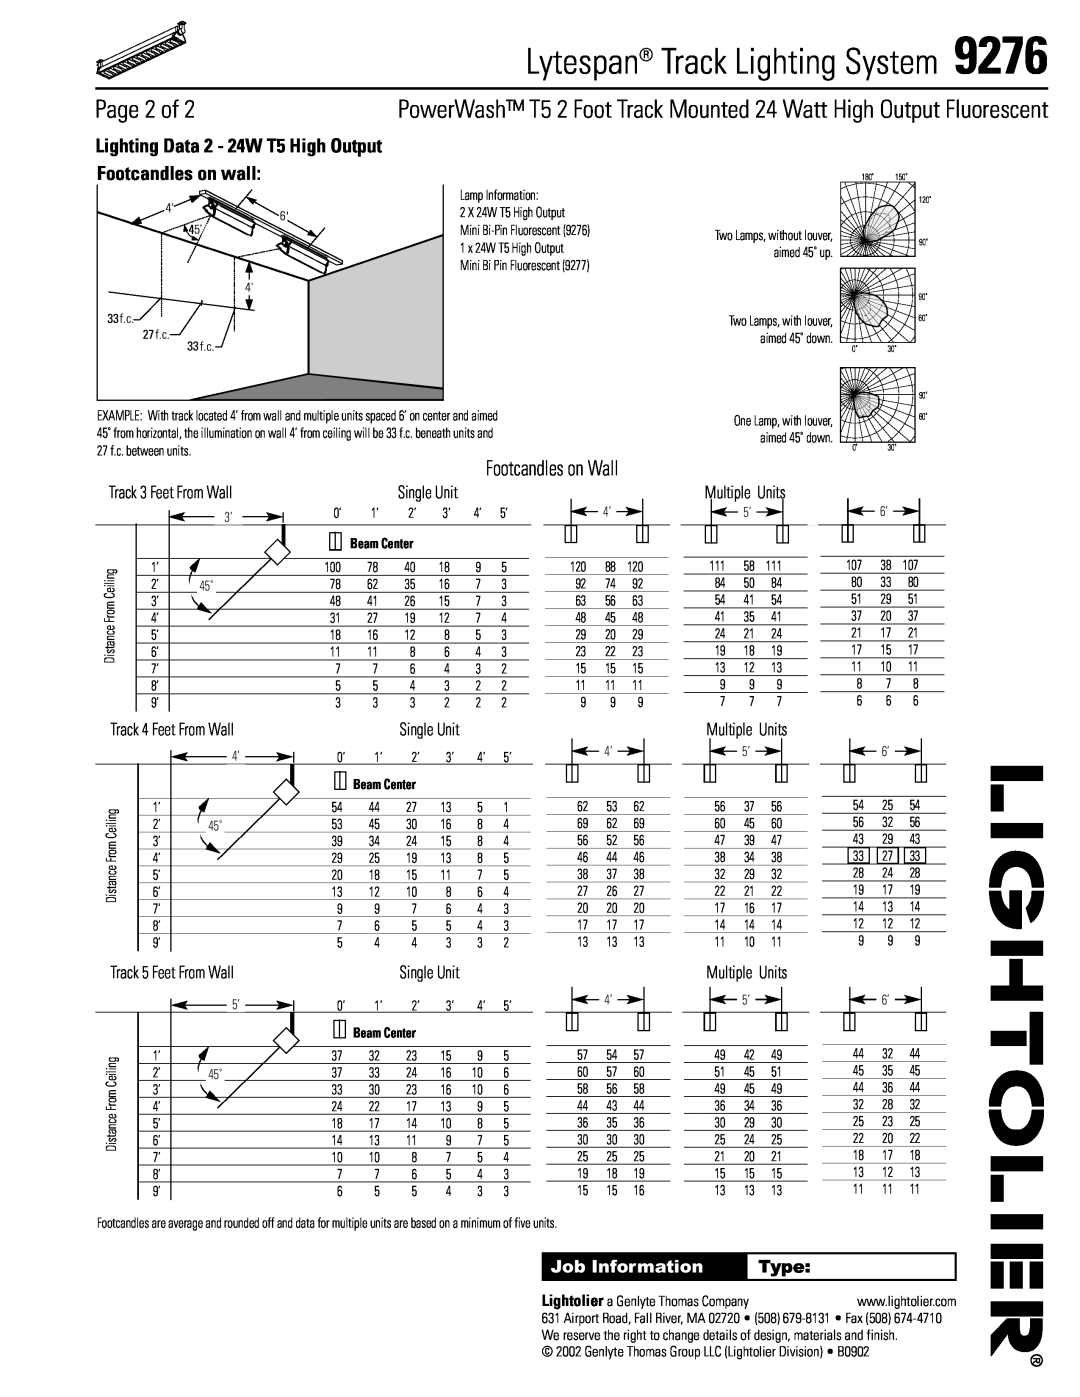 Lightolier 9276 Page 2 of, Lighting Data 2 - 24W T5 High Output, Footcandles on wall, Beam Center, Footcandles on Wall 